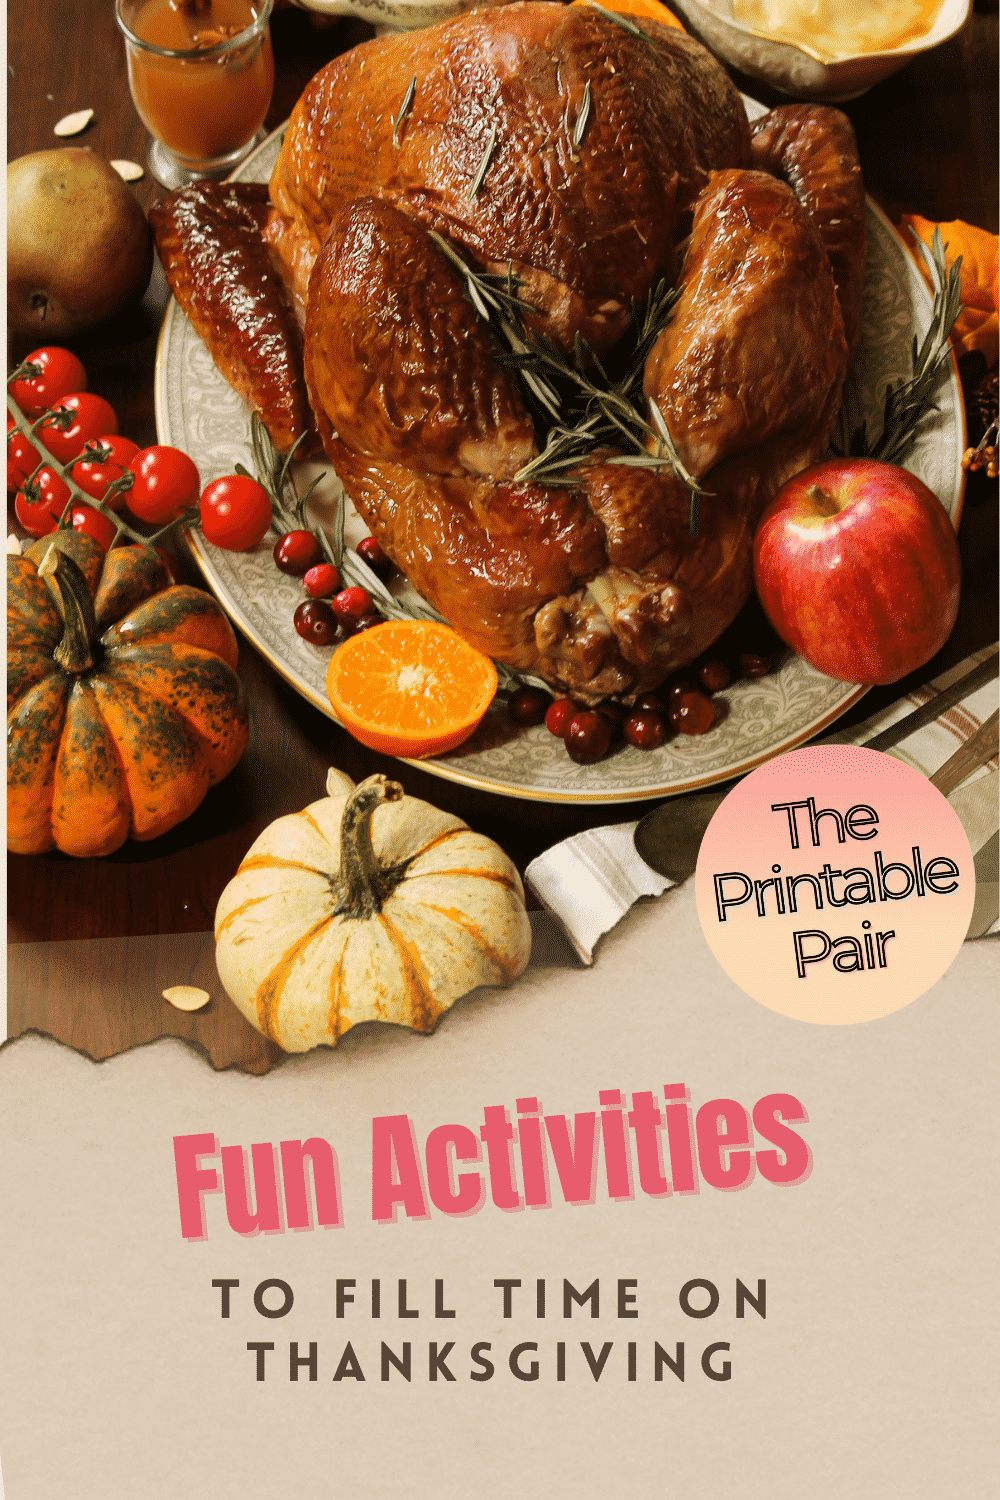 Fun Activities To Fill Time On Thanksgiving